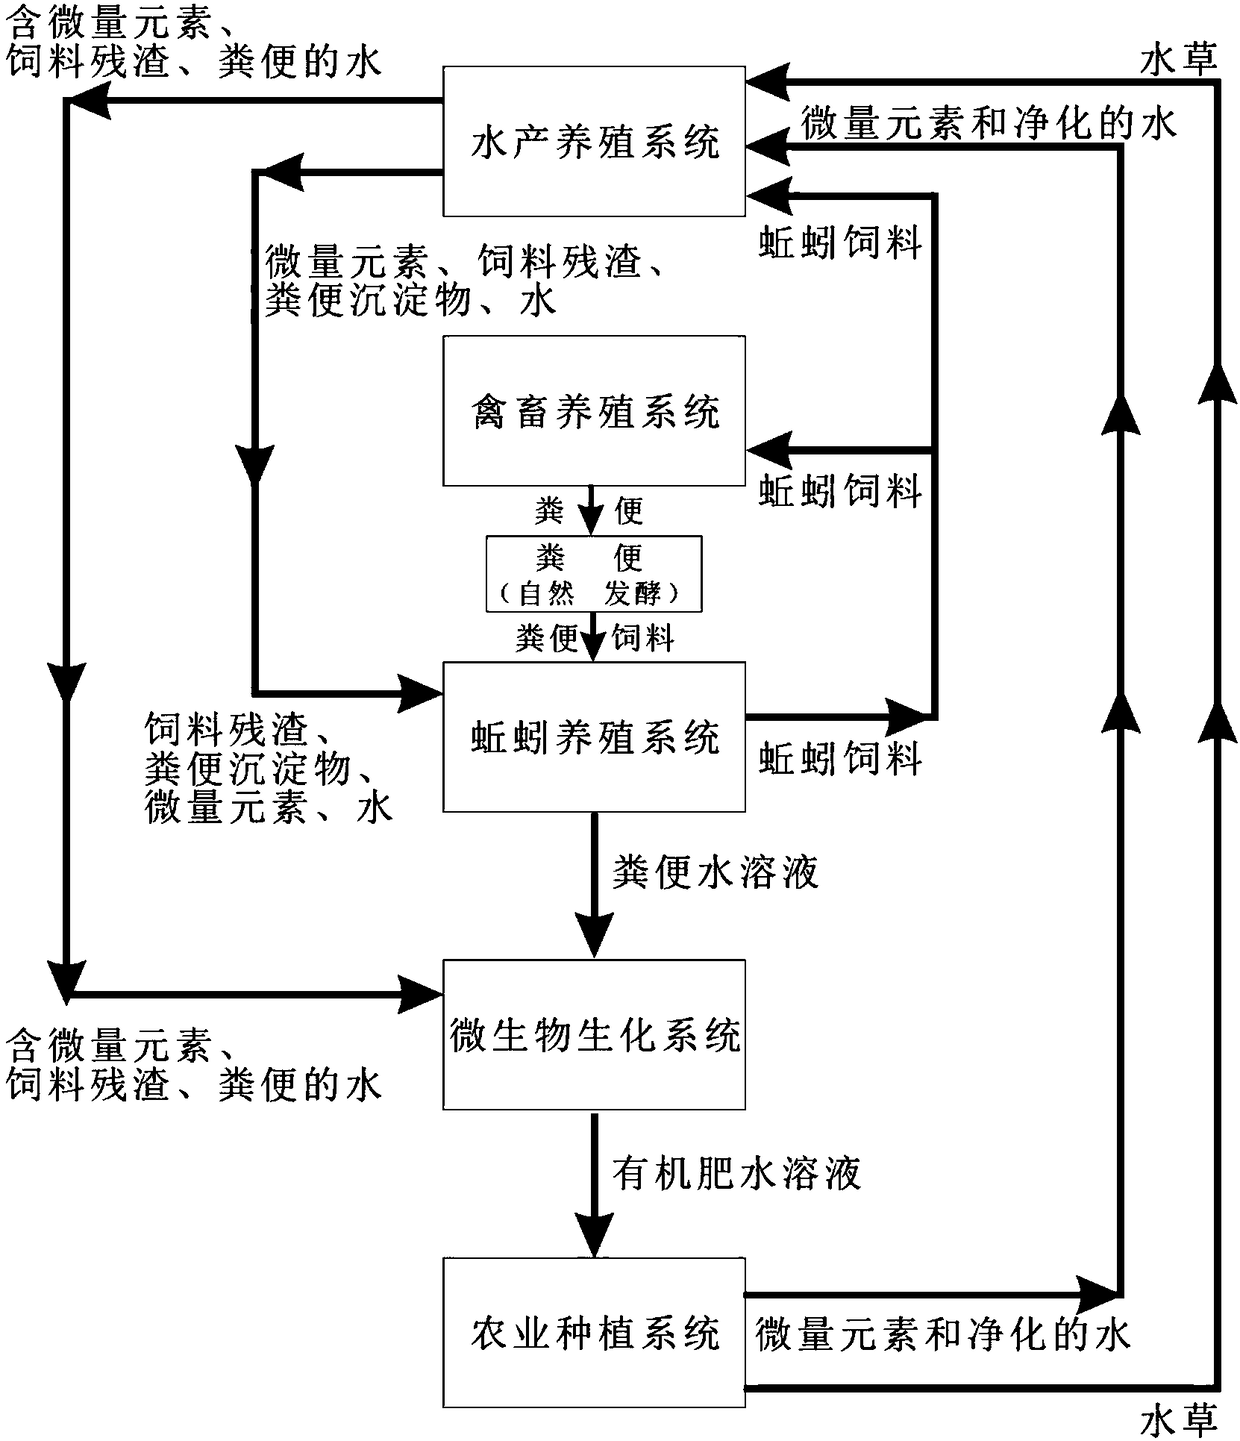 Agricultural planting and breeding ecologic resource recycling production system